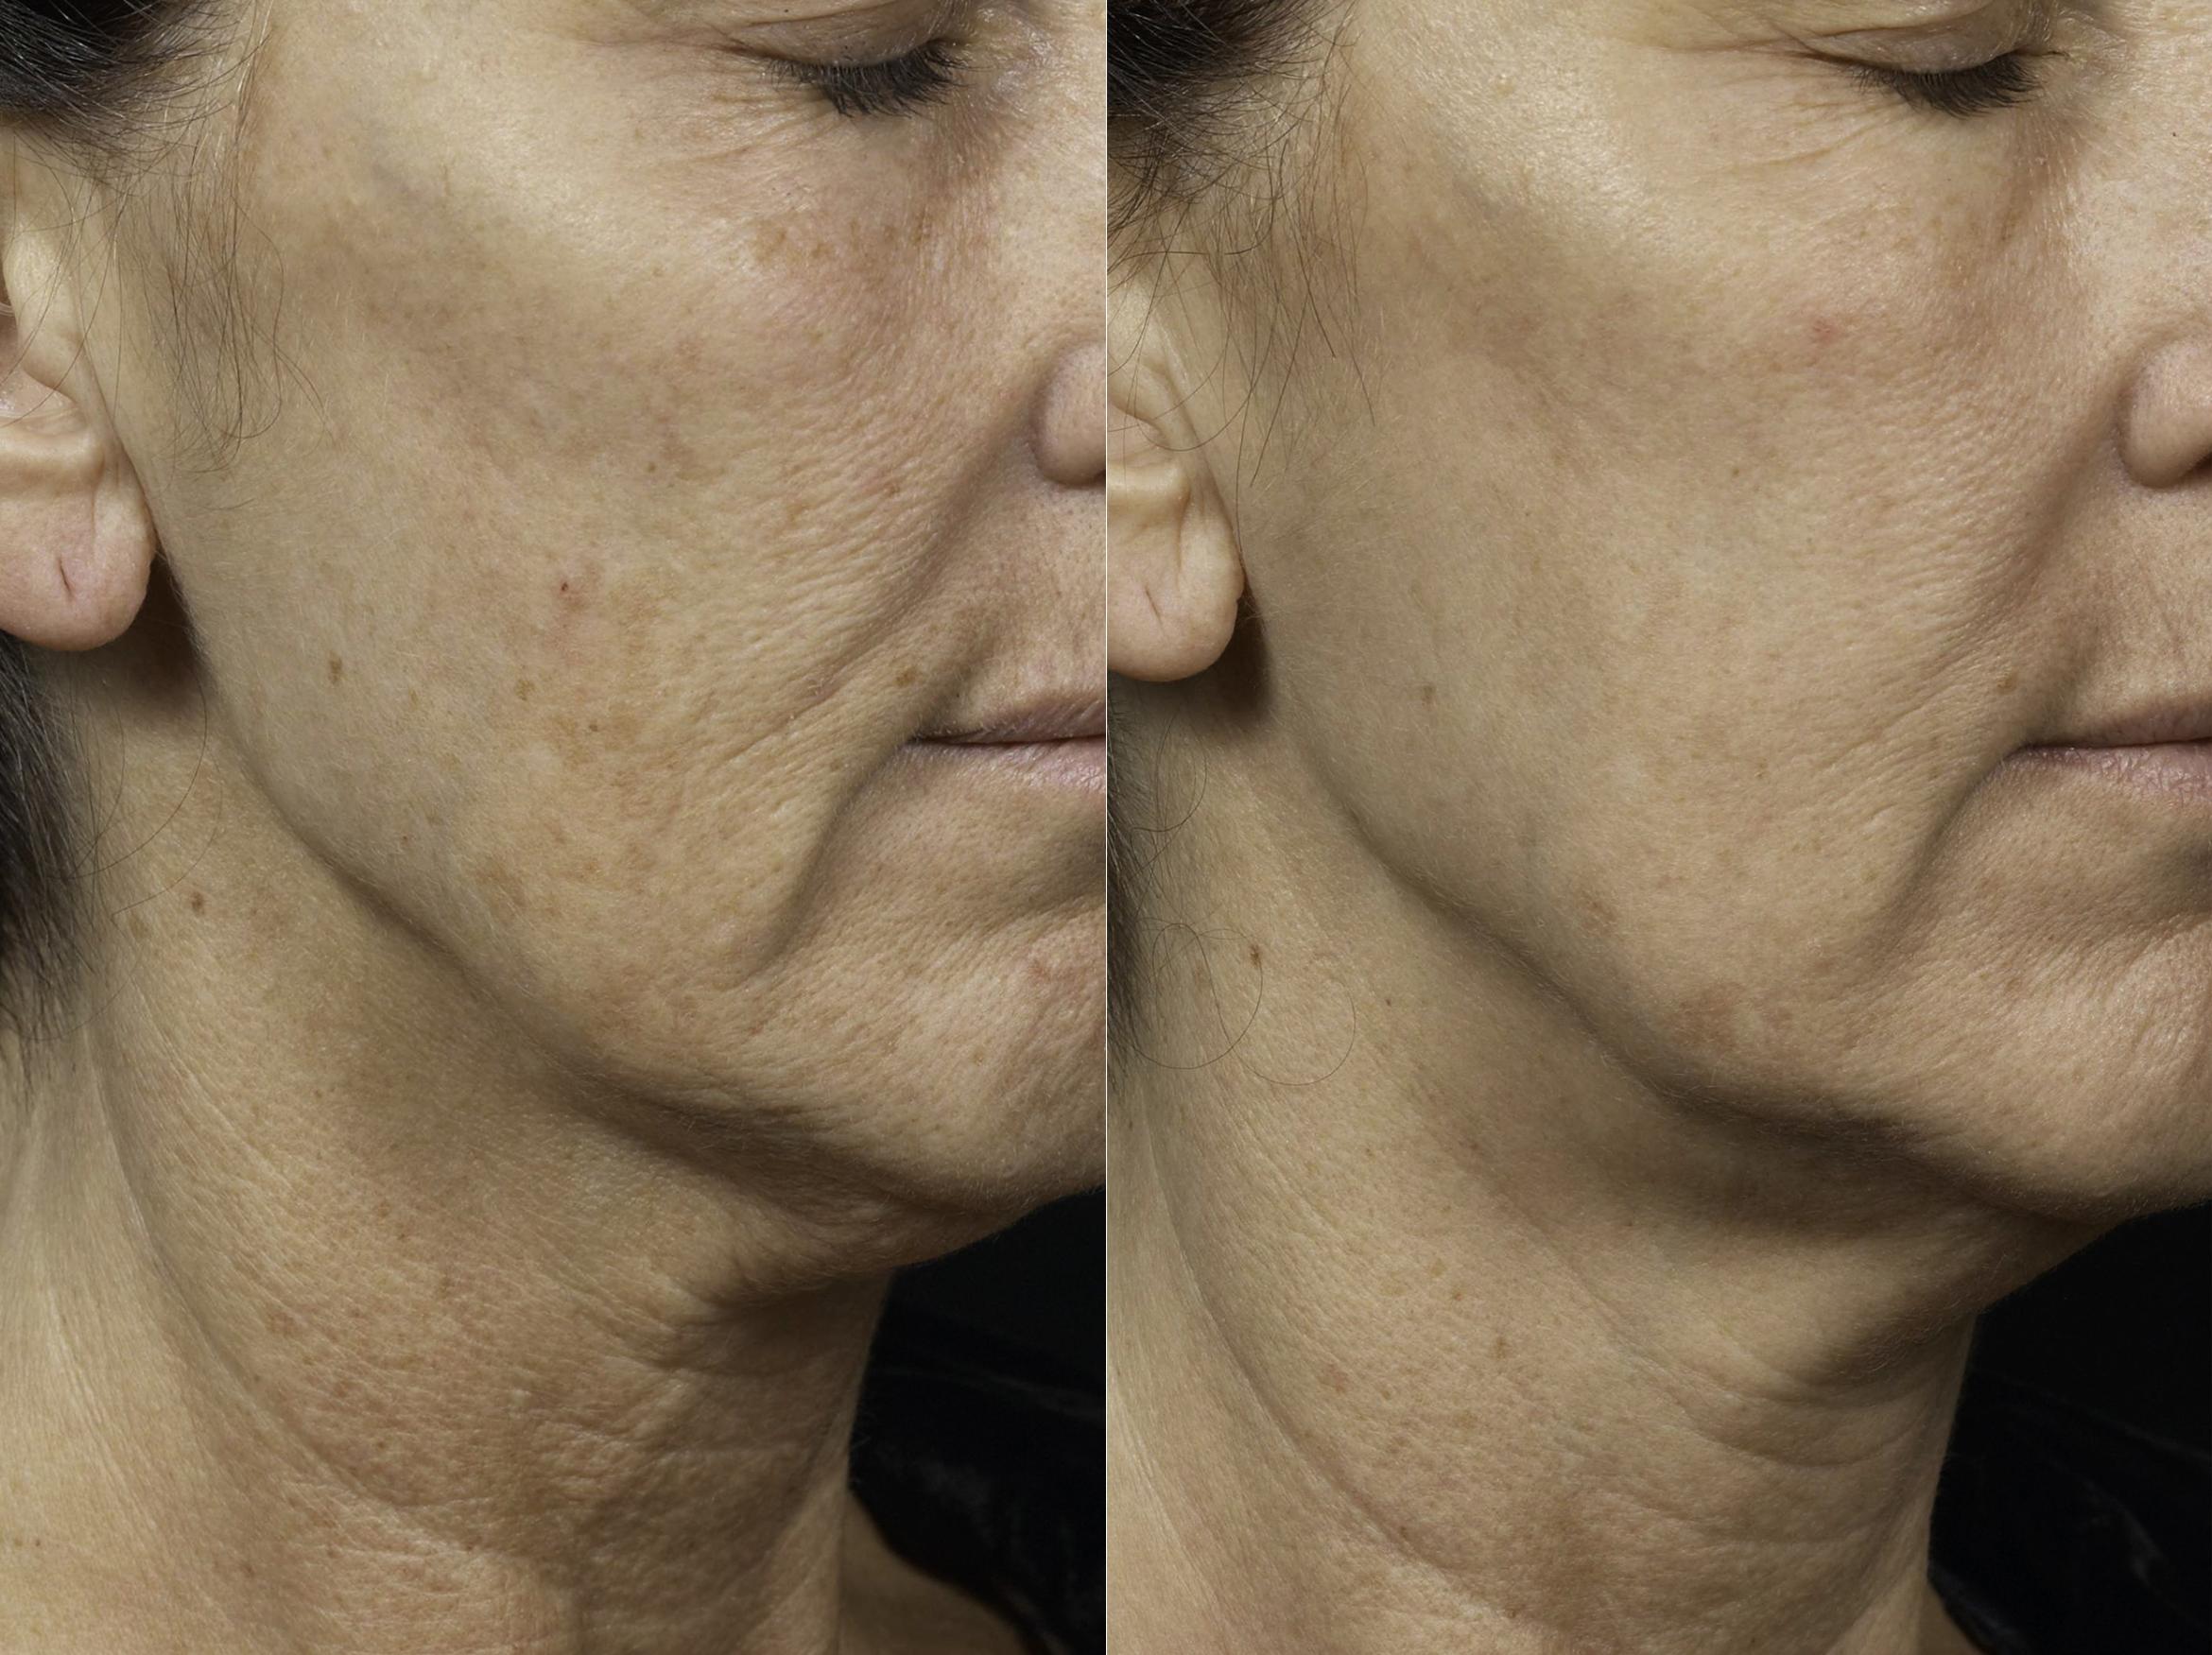 Before and after pictures of a woman's cheeks showing less skin discoloration after Fraxel treatment.